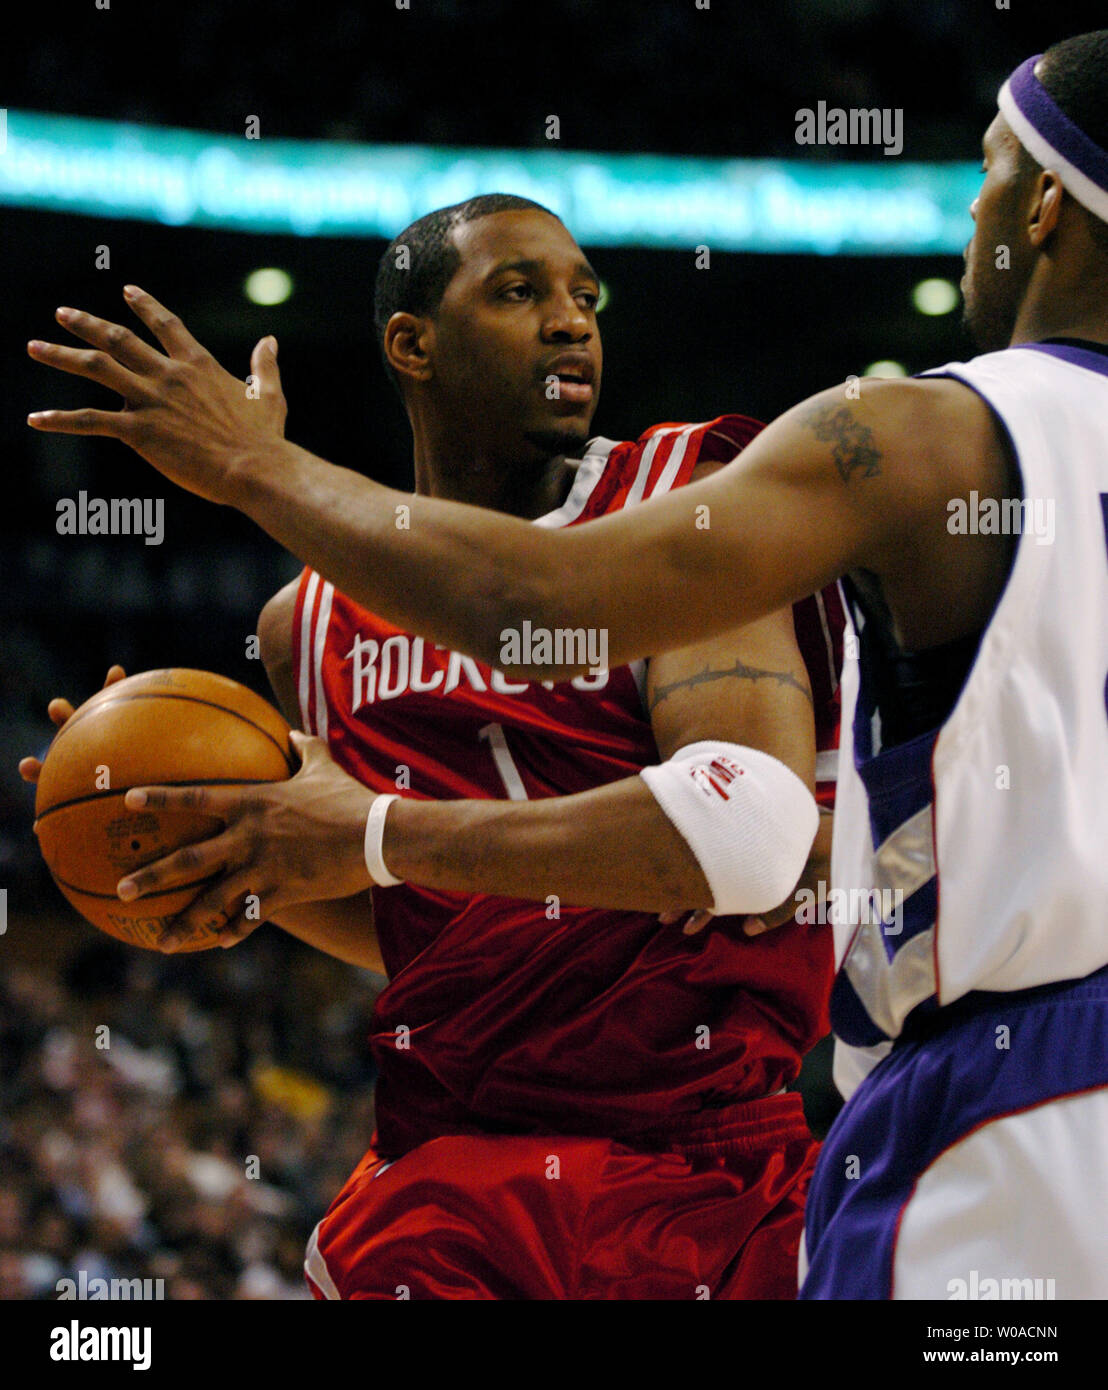 Houston Rockets' Tracy McGrady looks for a teammate to pass to as Toronto Raptors' Morris Peterson guards him during first quarter action at the Air Canada Center on January 6, 2006 in Toronto, Canada. McGrady led all scorers with 37 points on the night but the Raptors defeated the Rockets 112-92. (UPI Photo/Christine Chew) Stock Photo